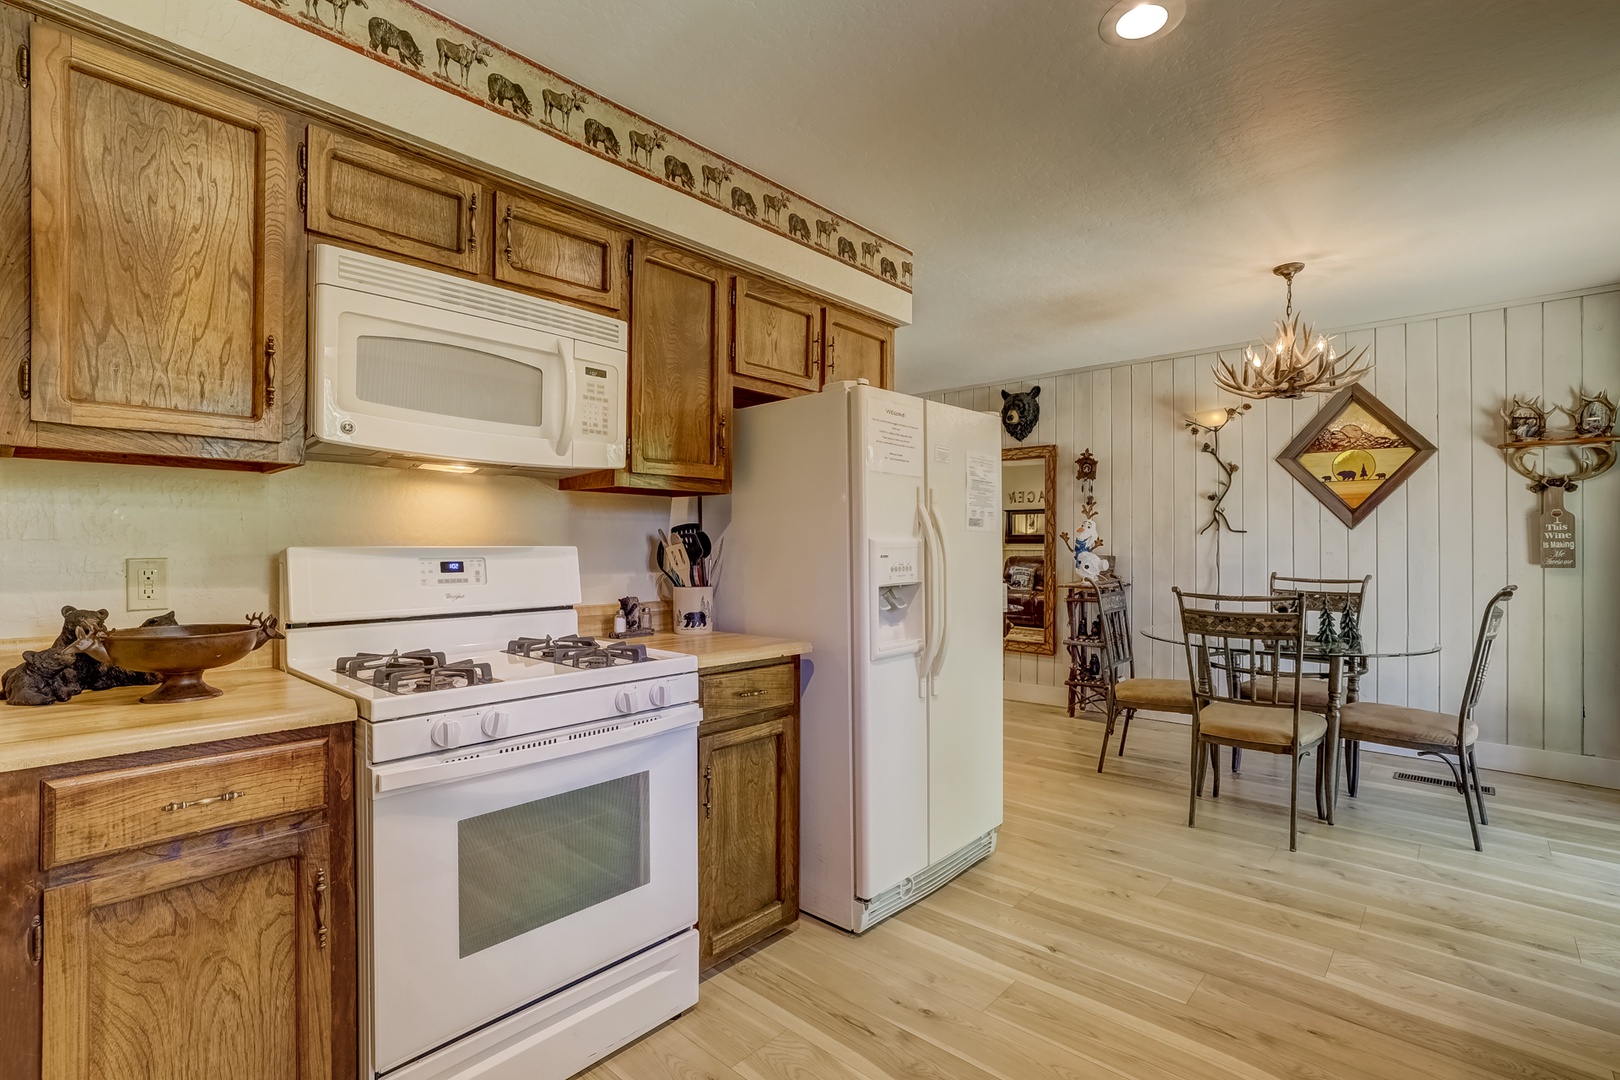 Full kitchen w/ toaster, Keurig coffee, blender, spices, wax paper, and more!